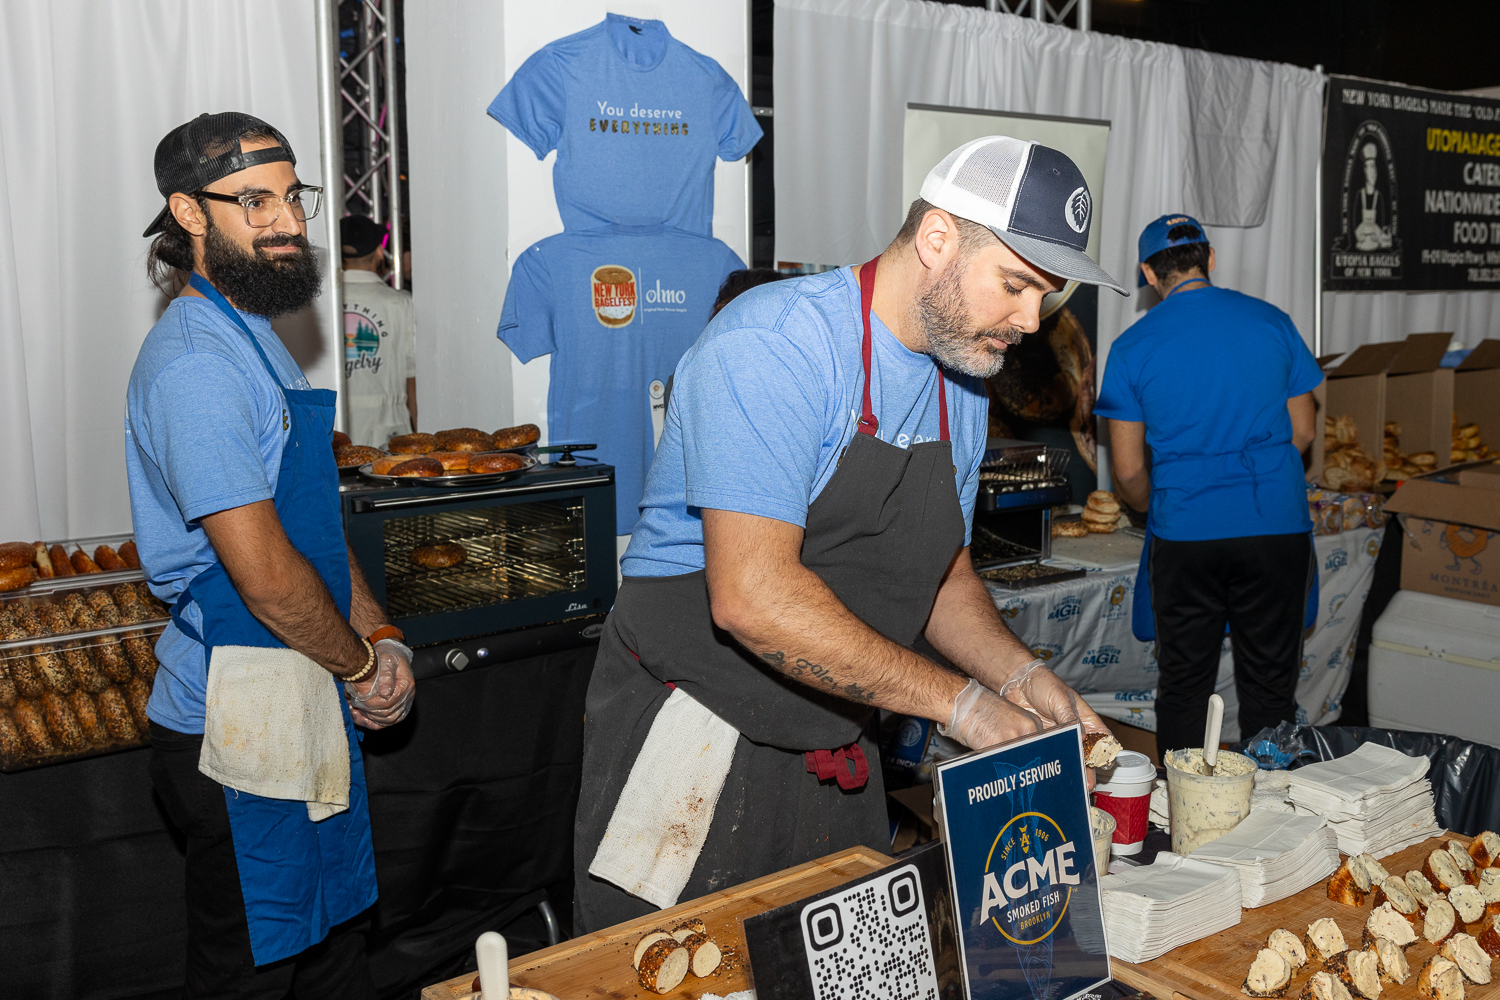 A man in a black hat and blue shirt from Olmo standing on the left. Another man in a white-and-gray hat, blue shirt and gray apron, also from Olmo, serving bite-sized everything bagels filled with Yuzu Kosho cream cheese.